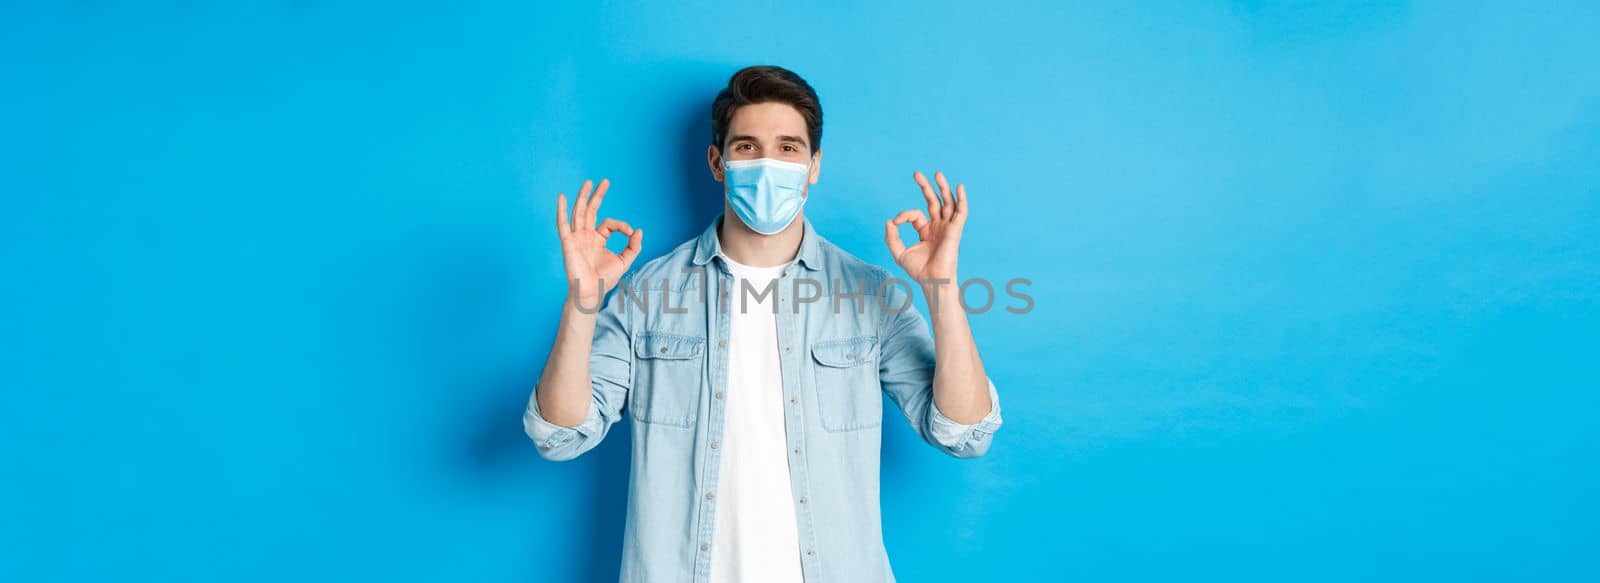 Concept of covid-19, pandemic and social distancing. Satisfied man in medical mask, showing ok signs in approval, agree or like something good, standing over blue background.